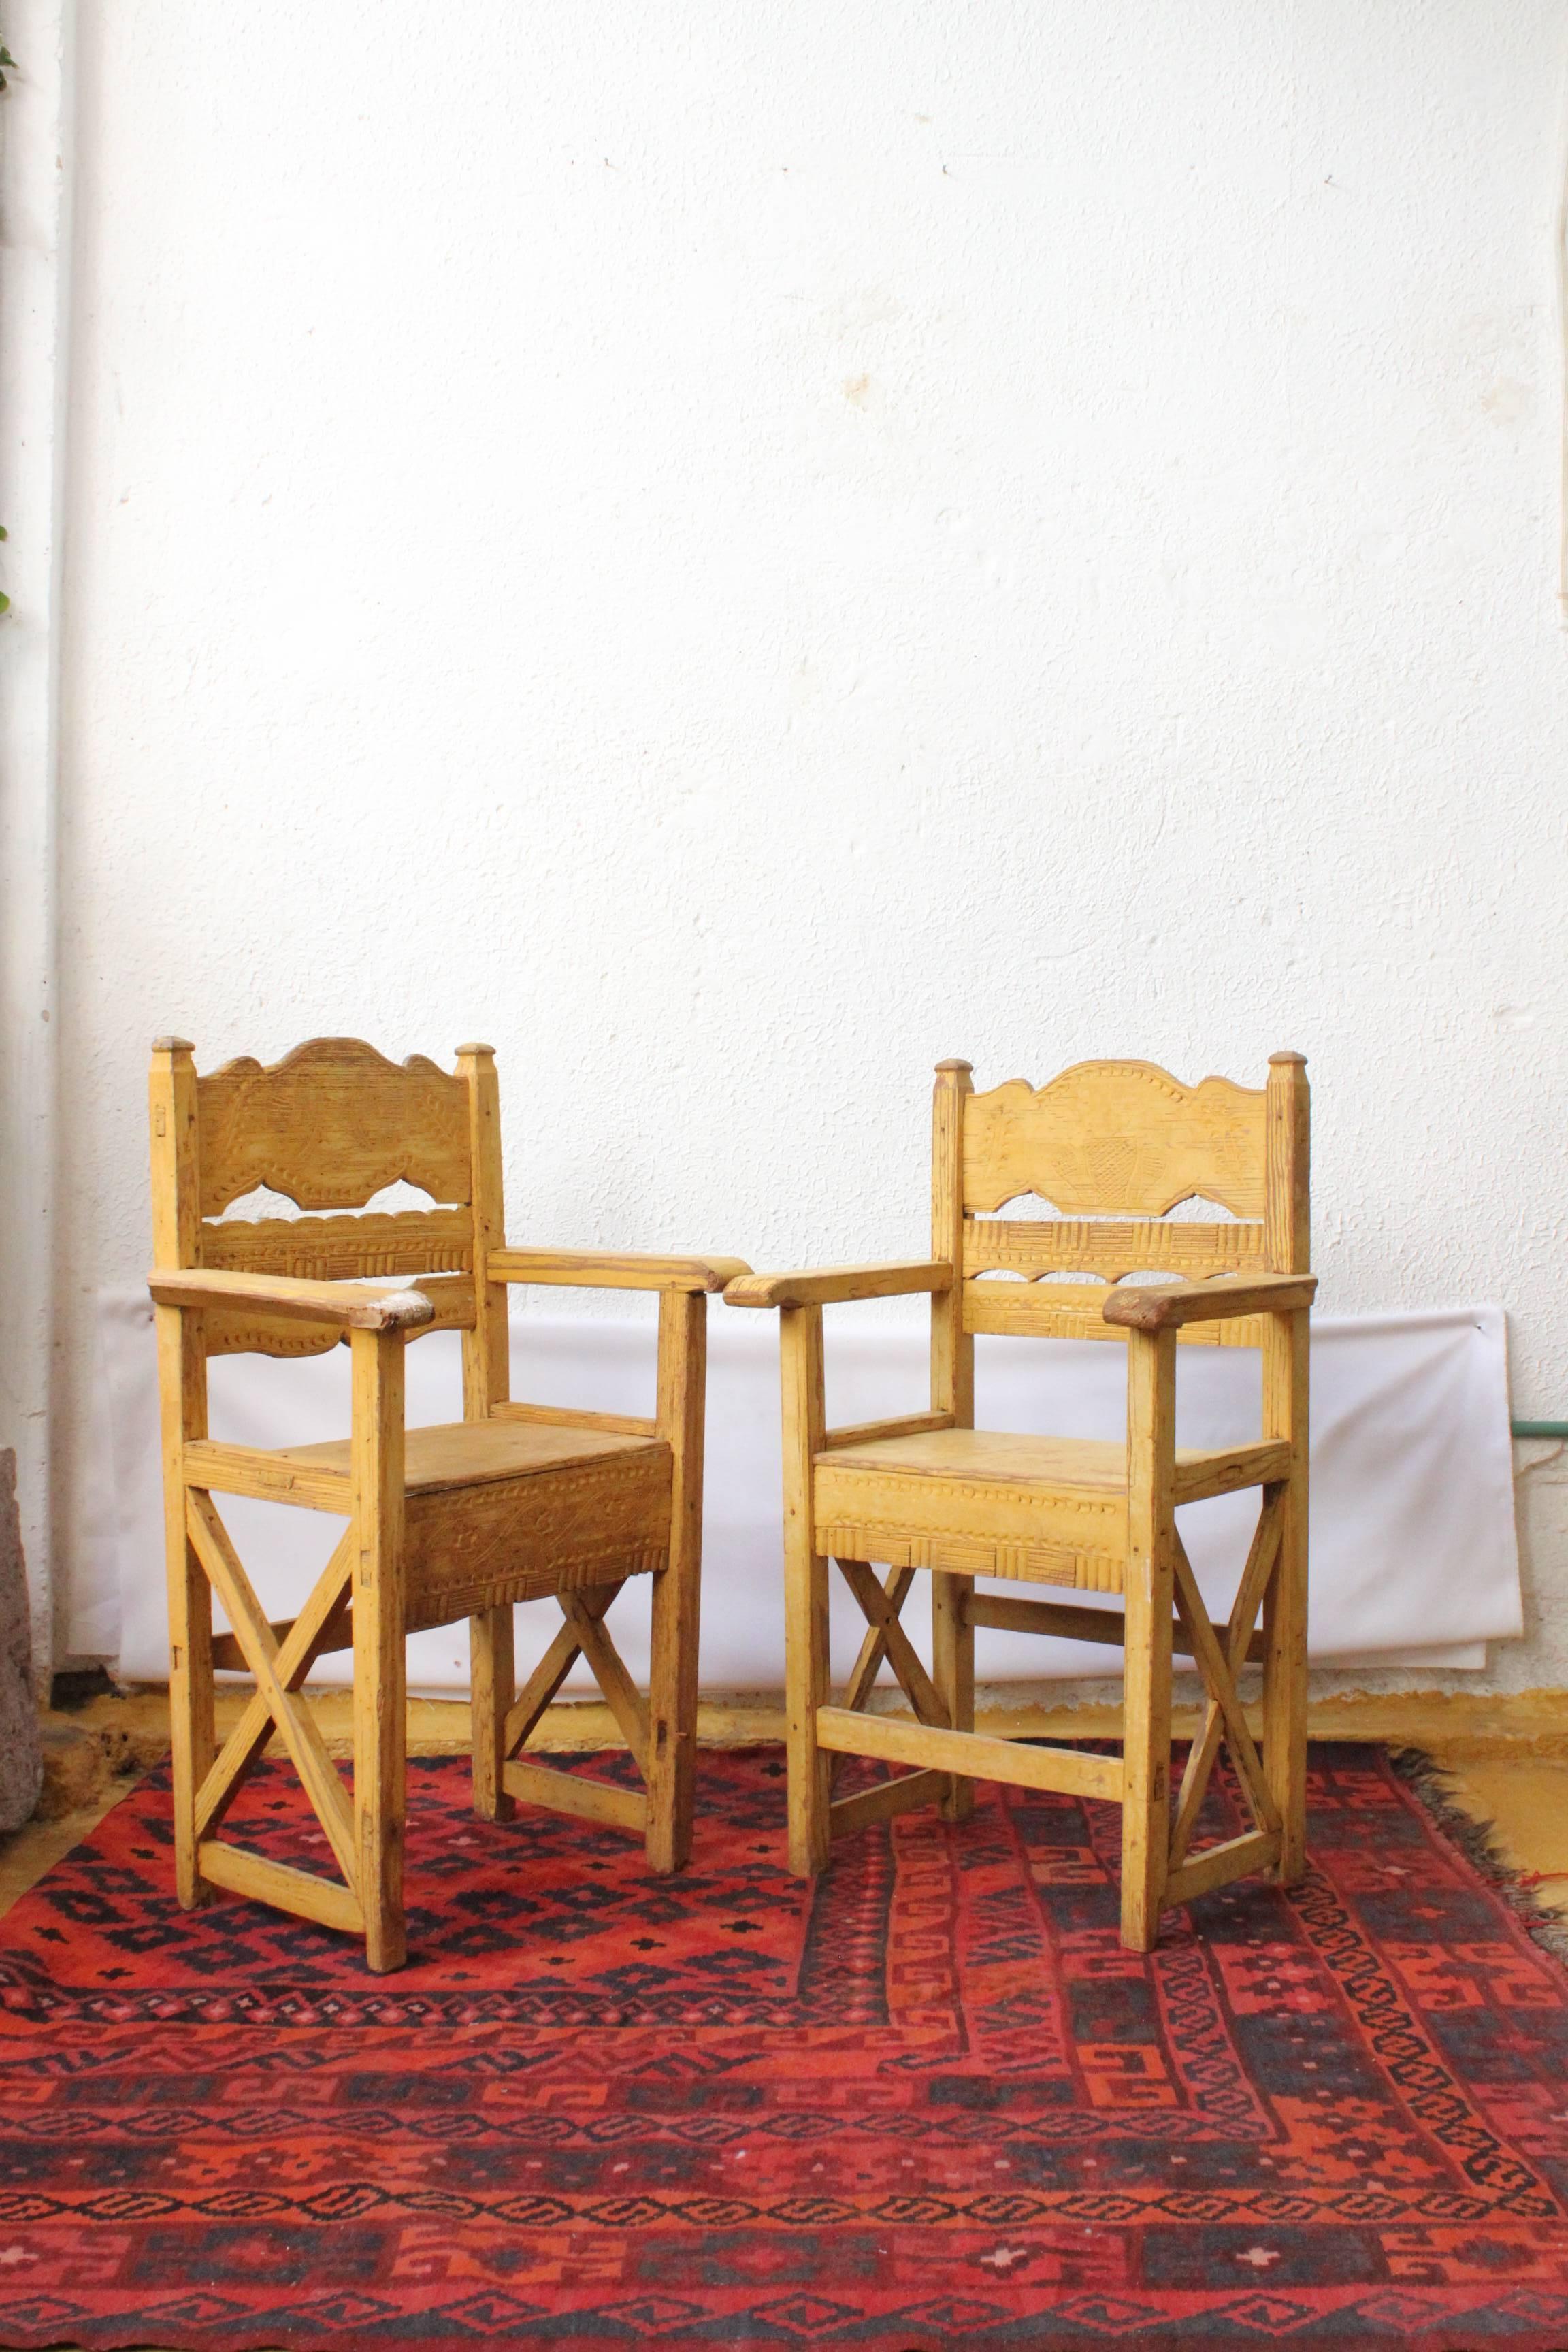 Wood Late 19th Century Set of Chairs Found in Western Mexico